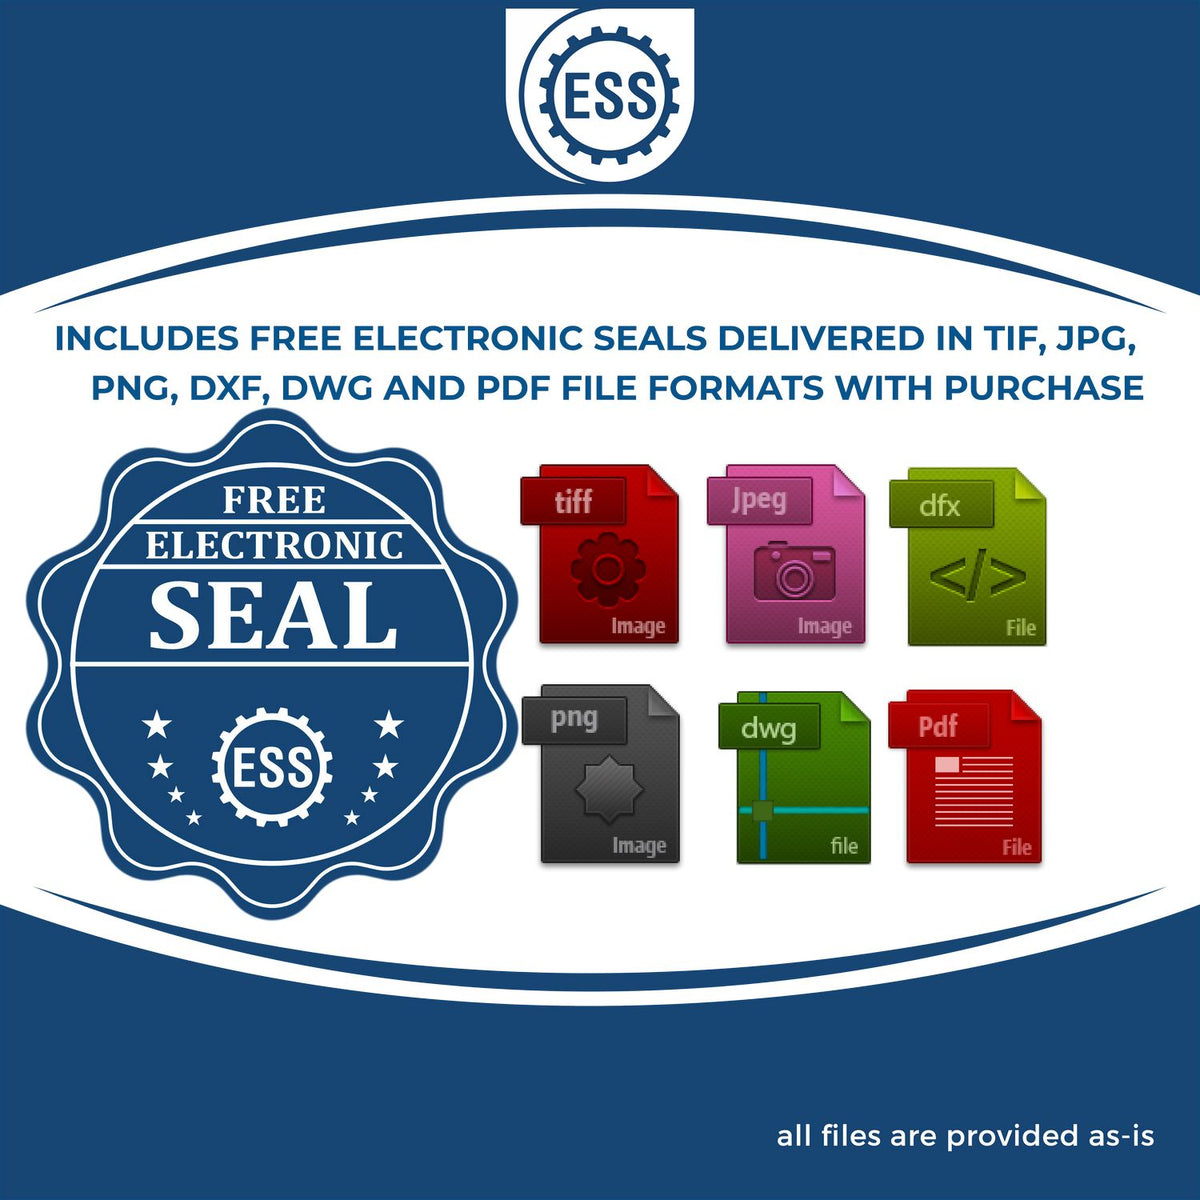 An infographic for the free electronic seal for the Self-Inking State Seal New Hampshire Notary Stamp illustrating the different file type icons such as DXF, DWG, TIF, JPG and PNG.